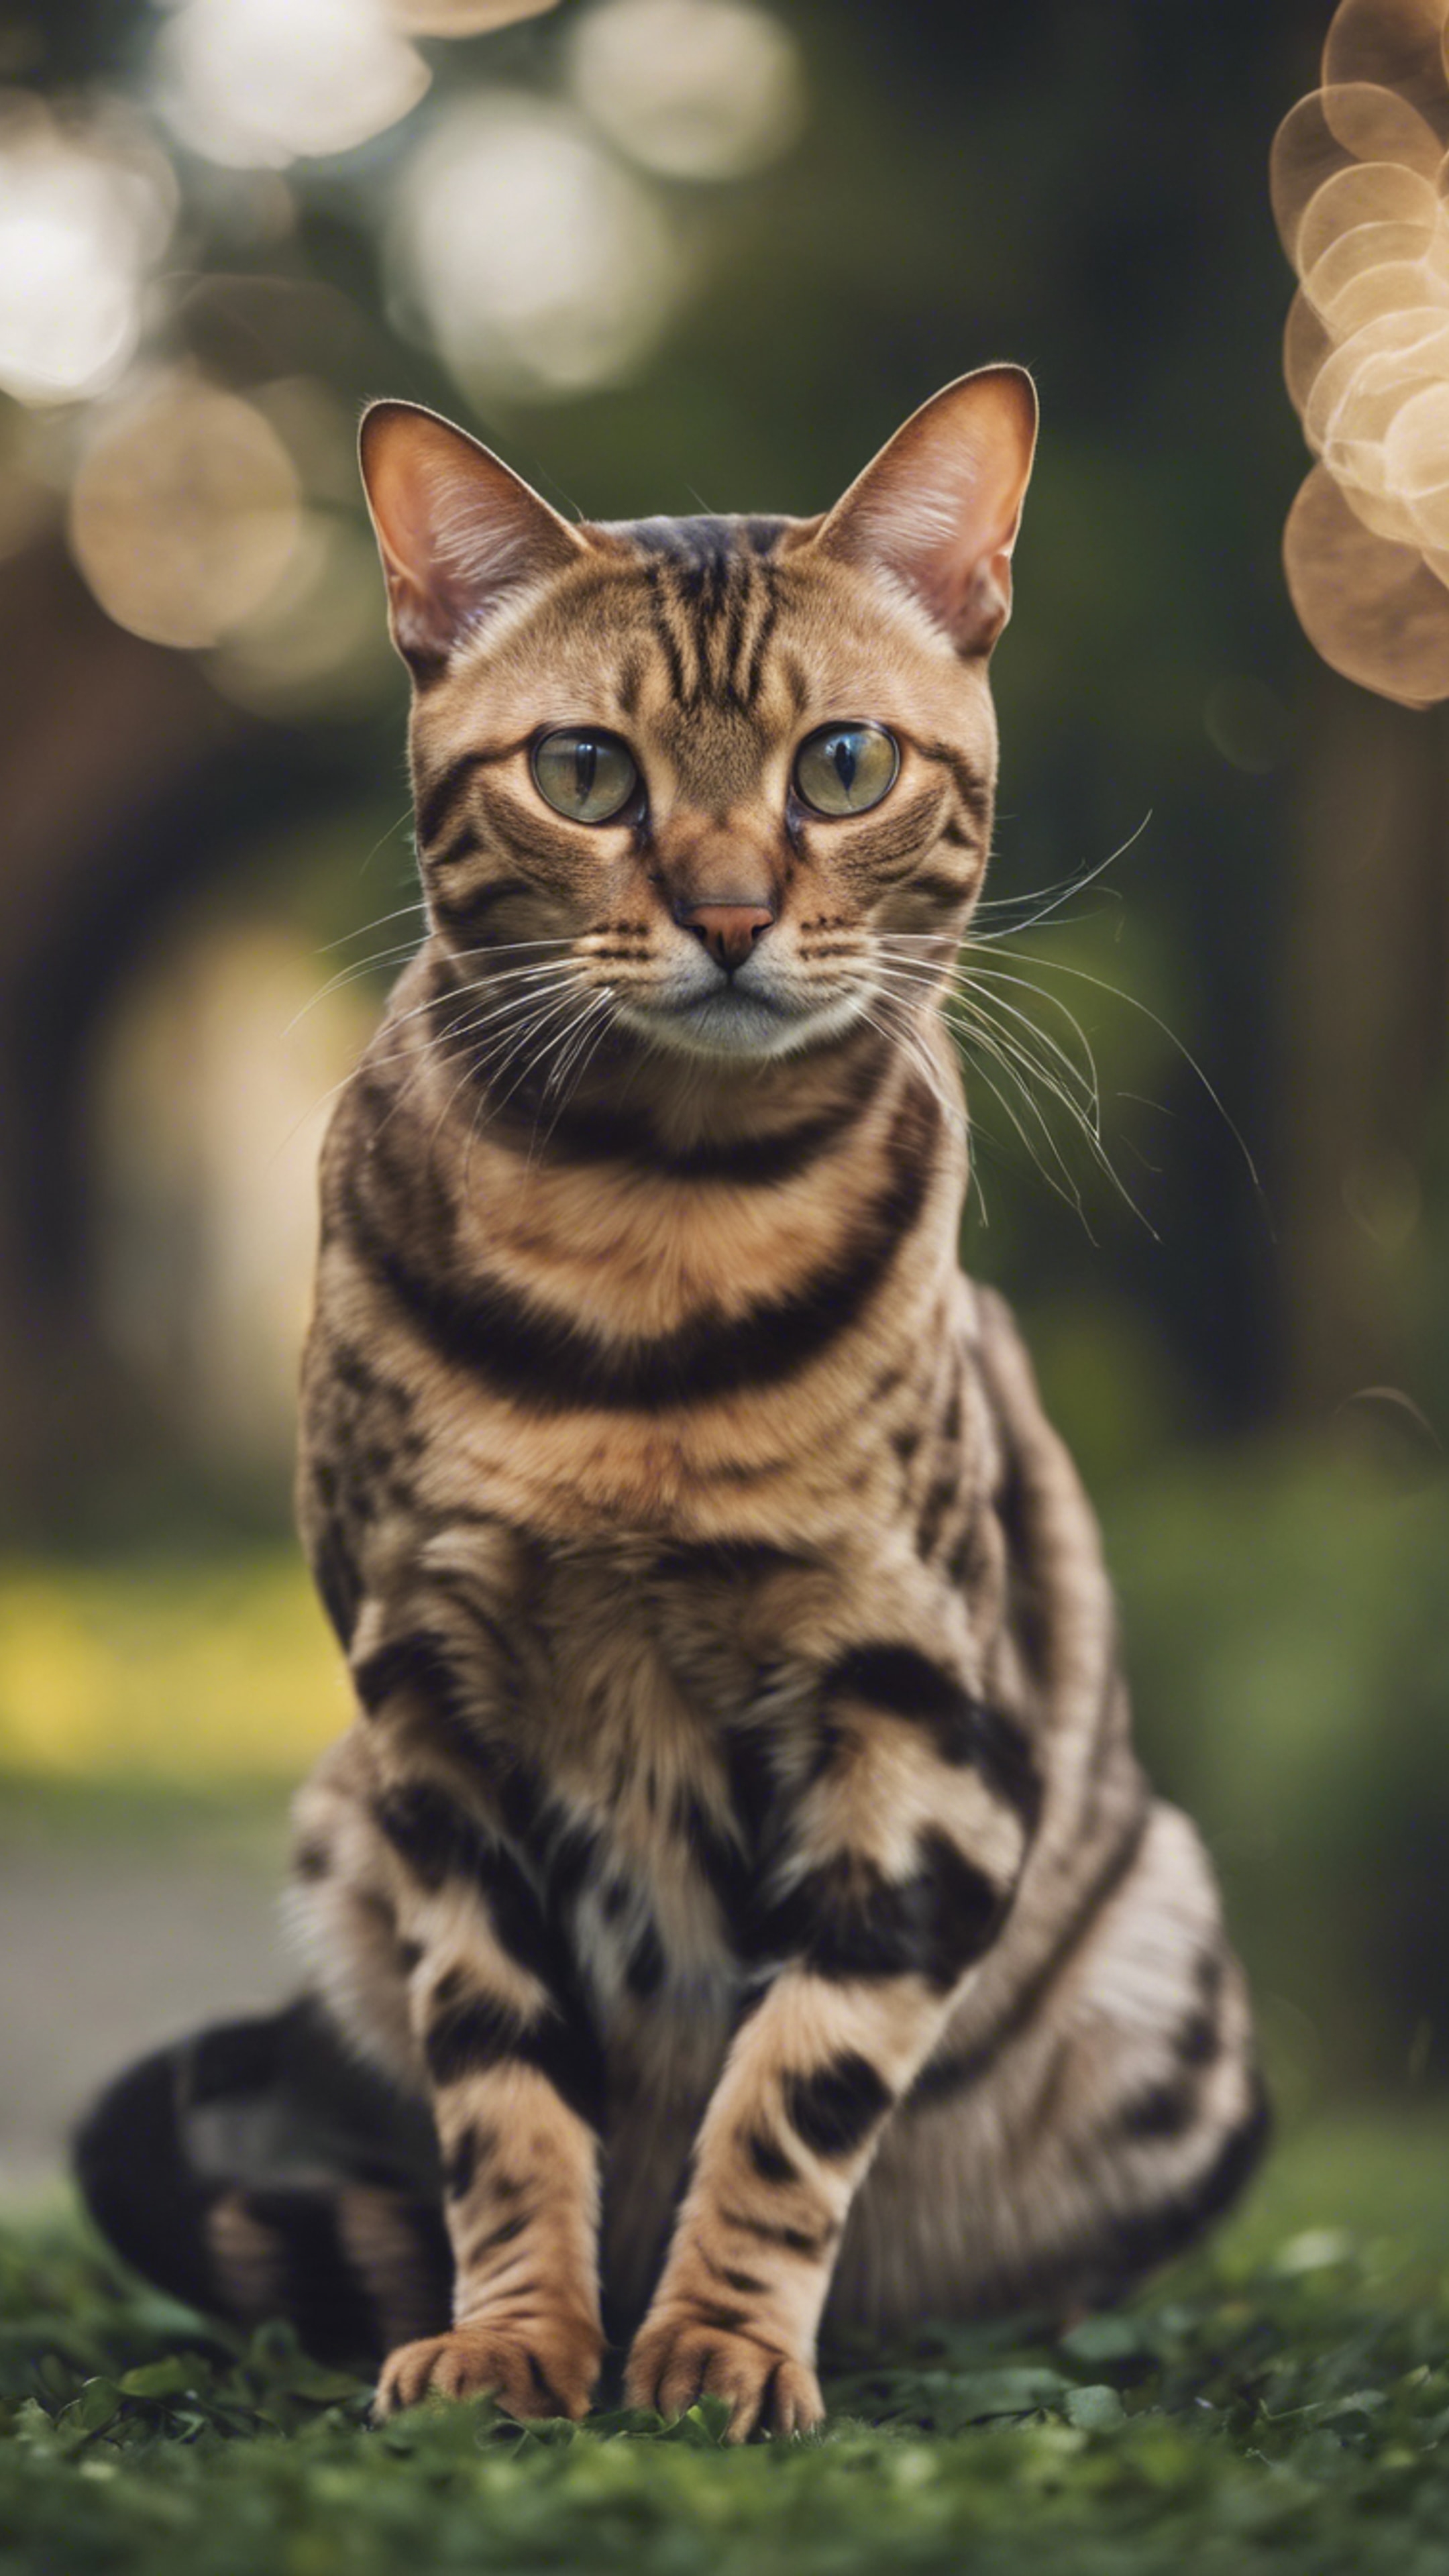 A sleek, aristocratic Bengal cat royally ignoring a mouse scampering by. Sfondo[9f7ab84a7c6b485a8696]